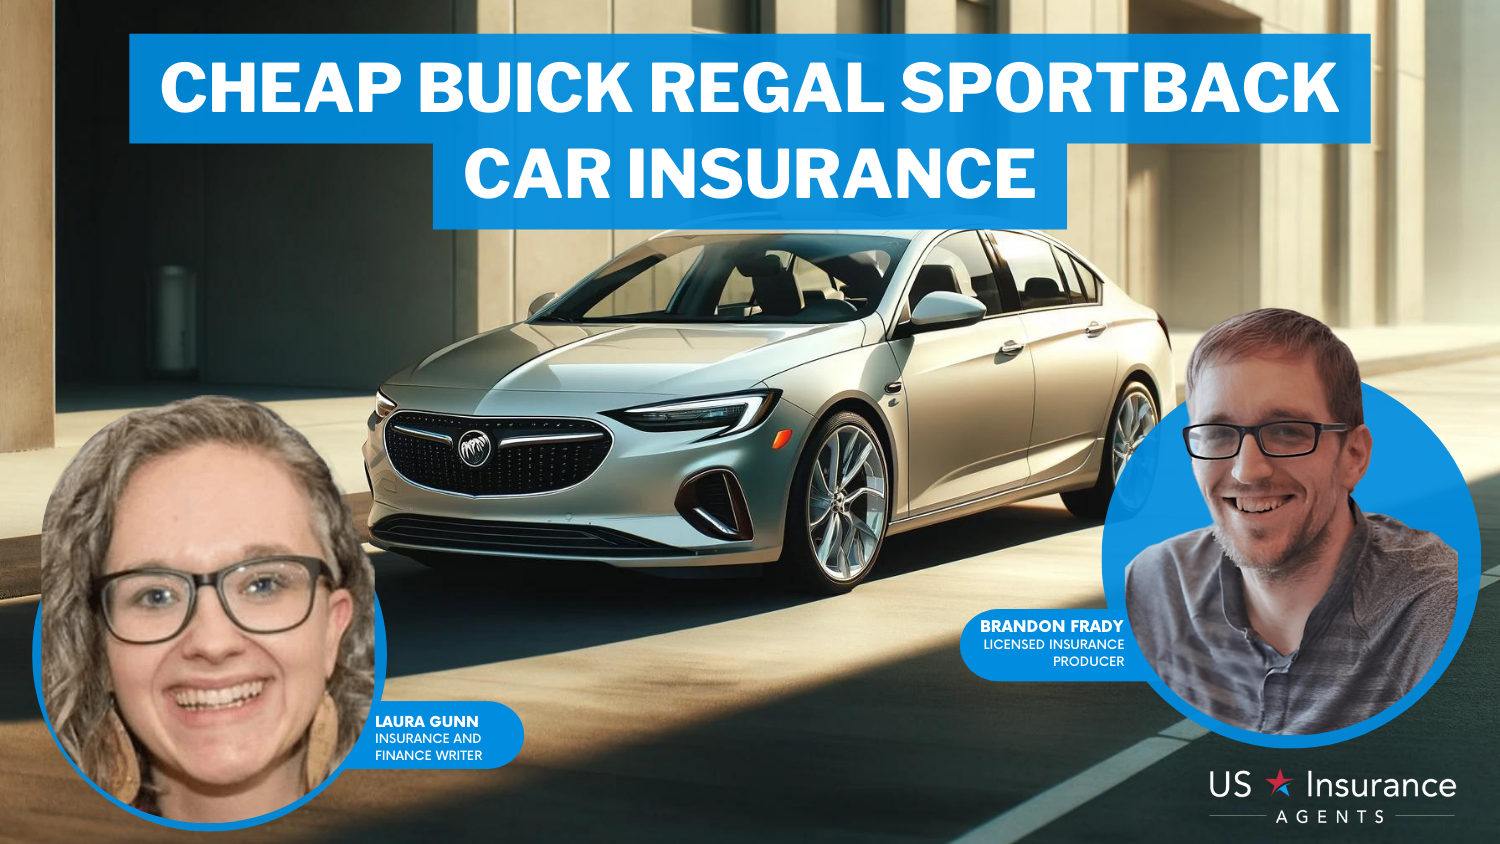 Cheap Buick Regal Sportback Car Insurance: Safeco, Travelers, and State Farm